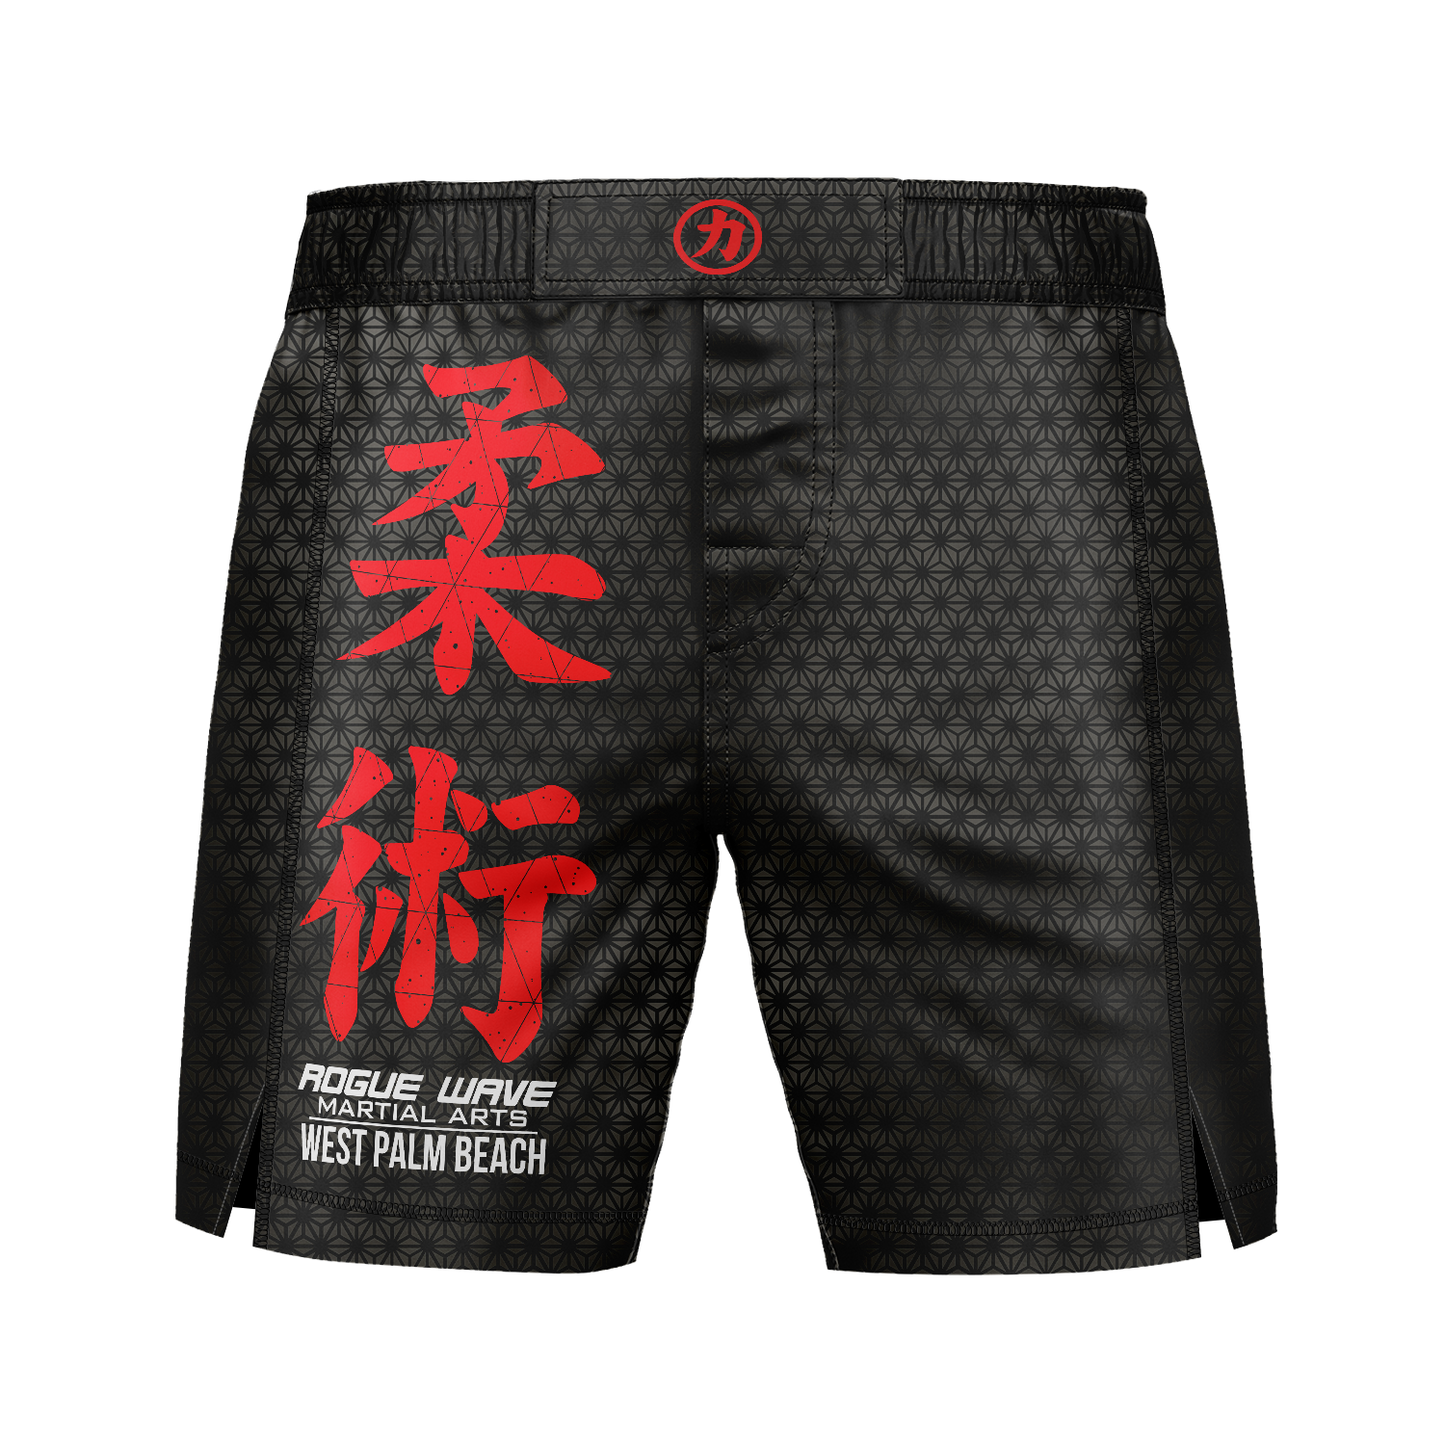 Rogue Wave men's fight shorts Fractal, red and black